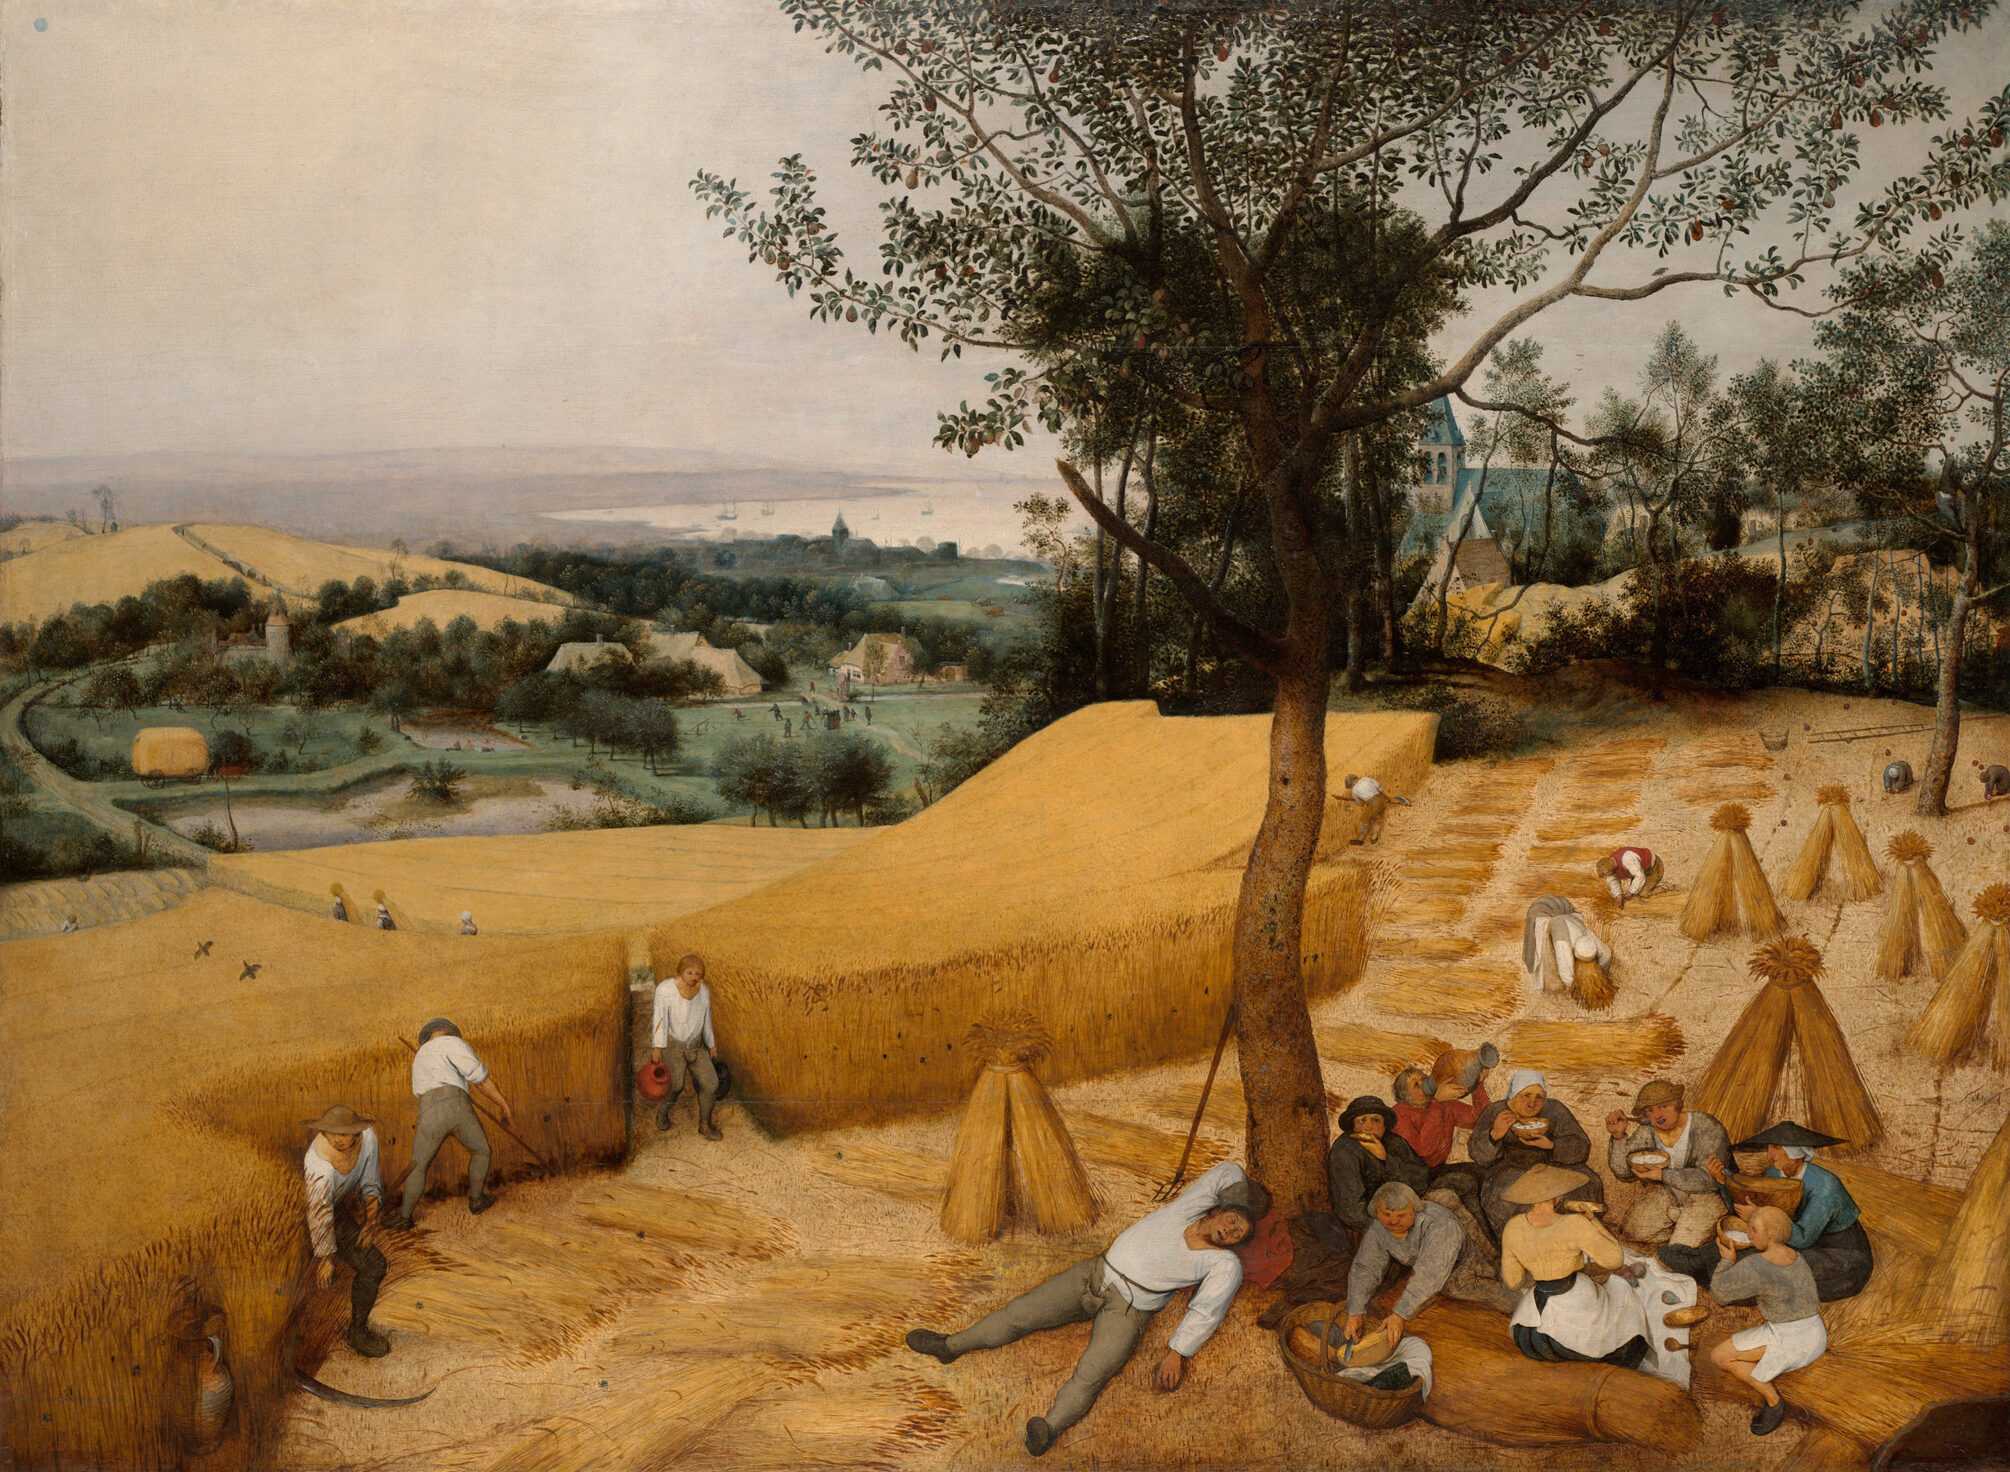 Portrait of wheat fields in the Netherlands cultivated by peasants